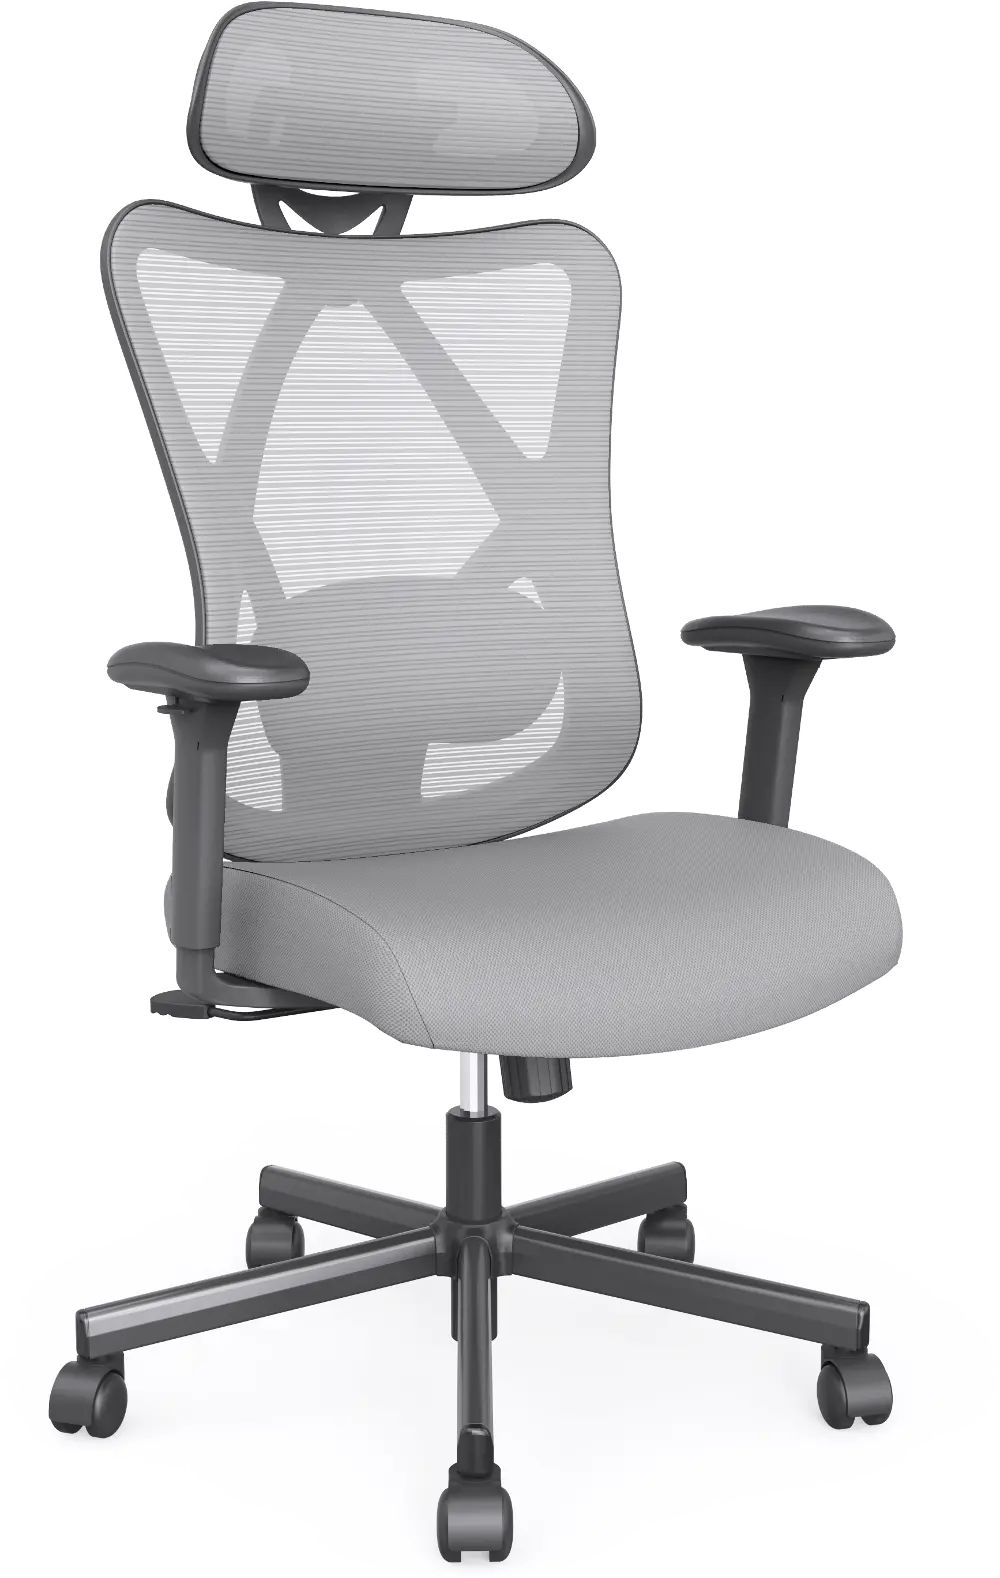 IDF-6031-GY Domie Metal and Mesh Gray Adjustable Office Chair-1